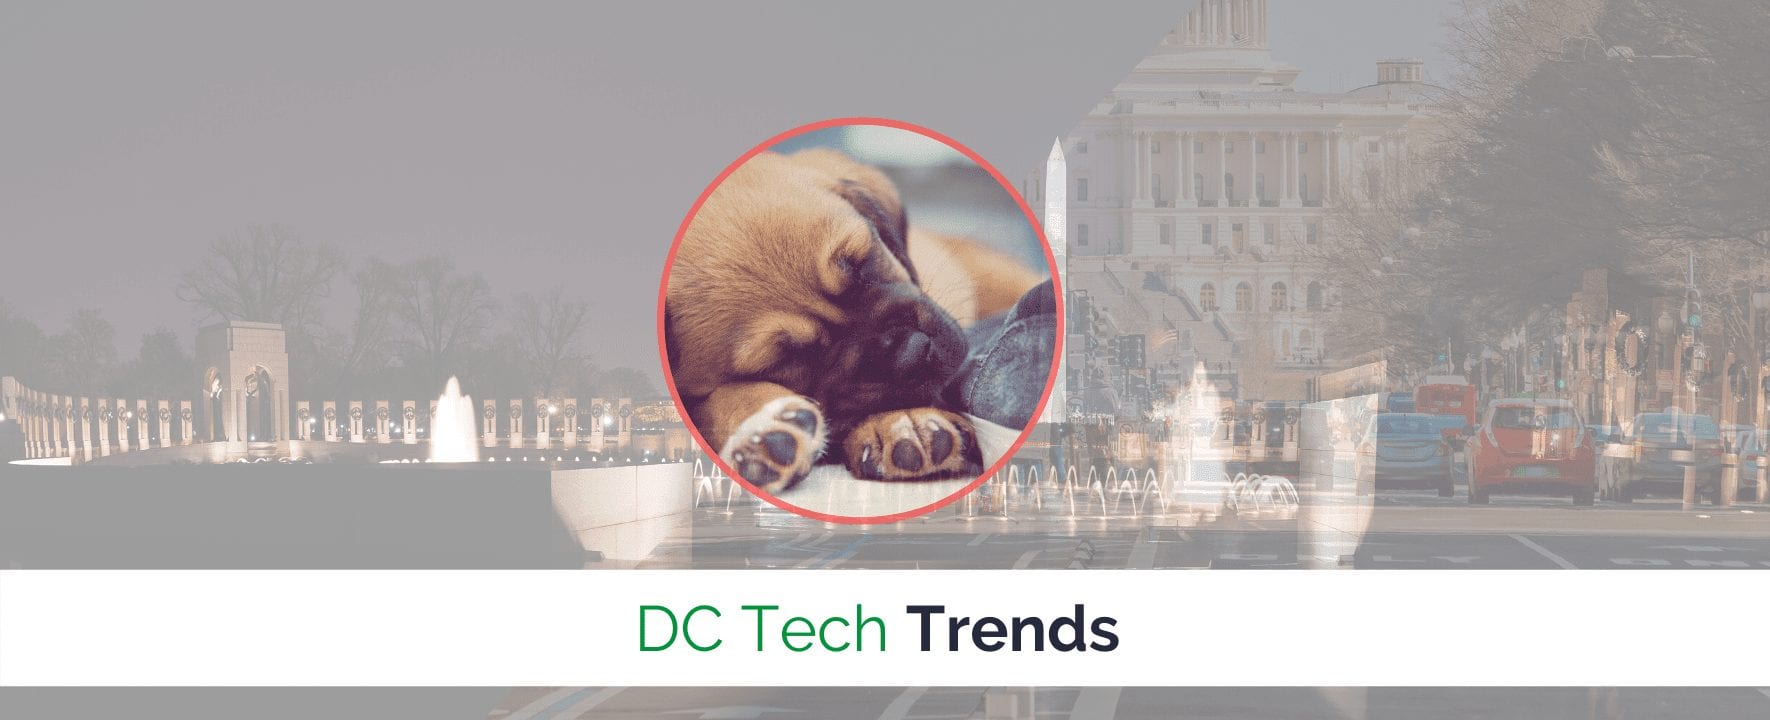 DC Startups Offer Pet Health Insurance and Other Perks to Stay Competitive